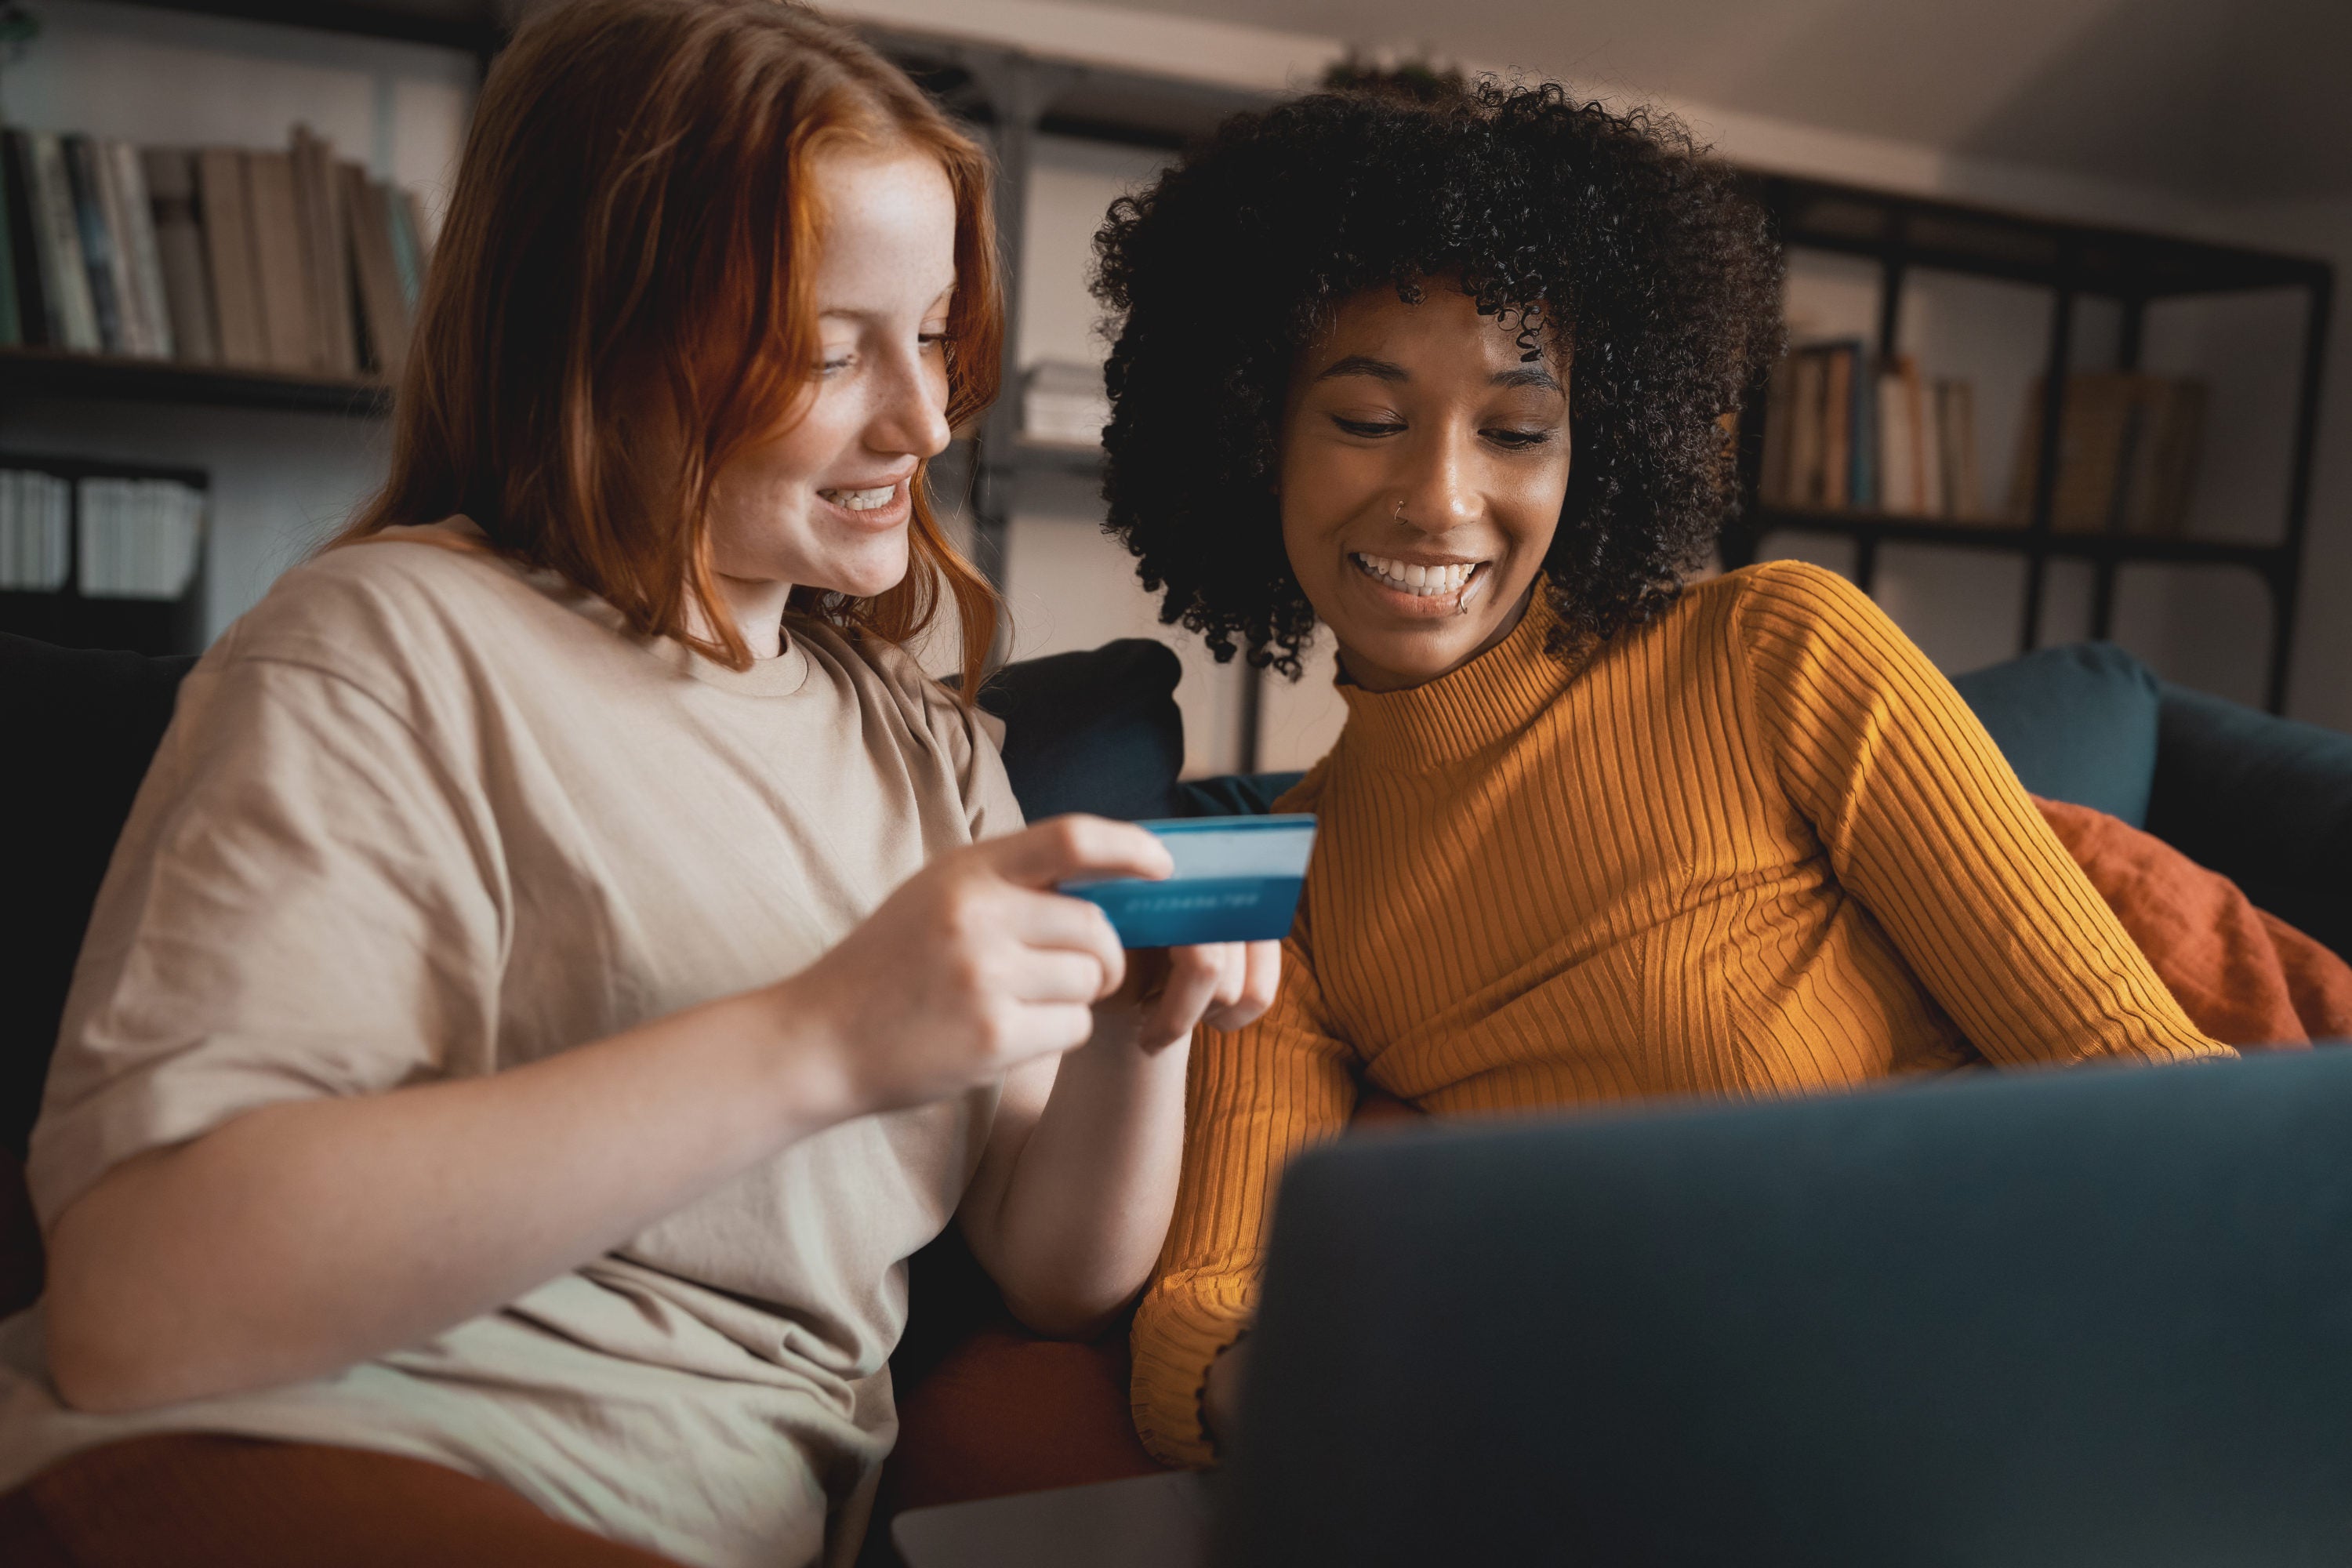 Two young women shopping online from the laptop sitting on the couch. Interracial couple of girlfriends using credit card to shop from an e-commerce website.